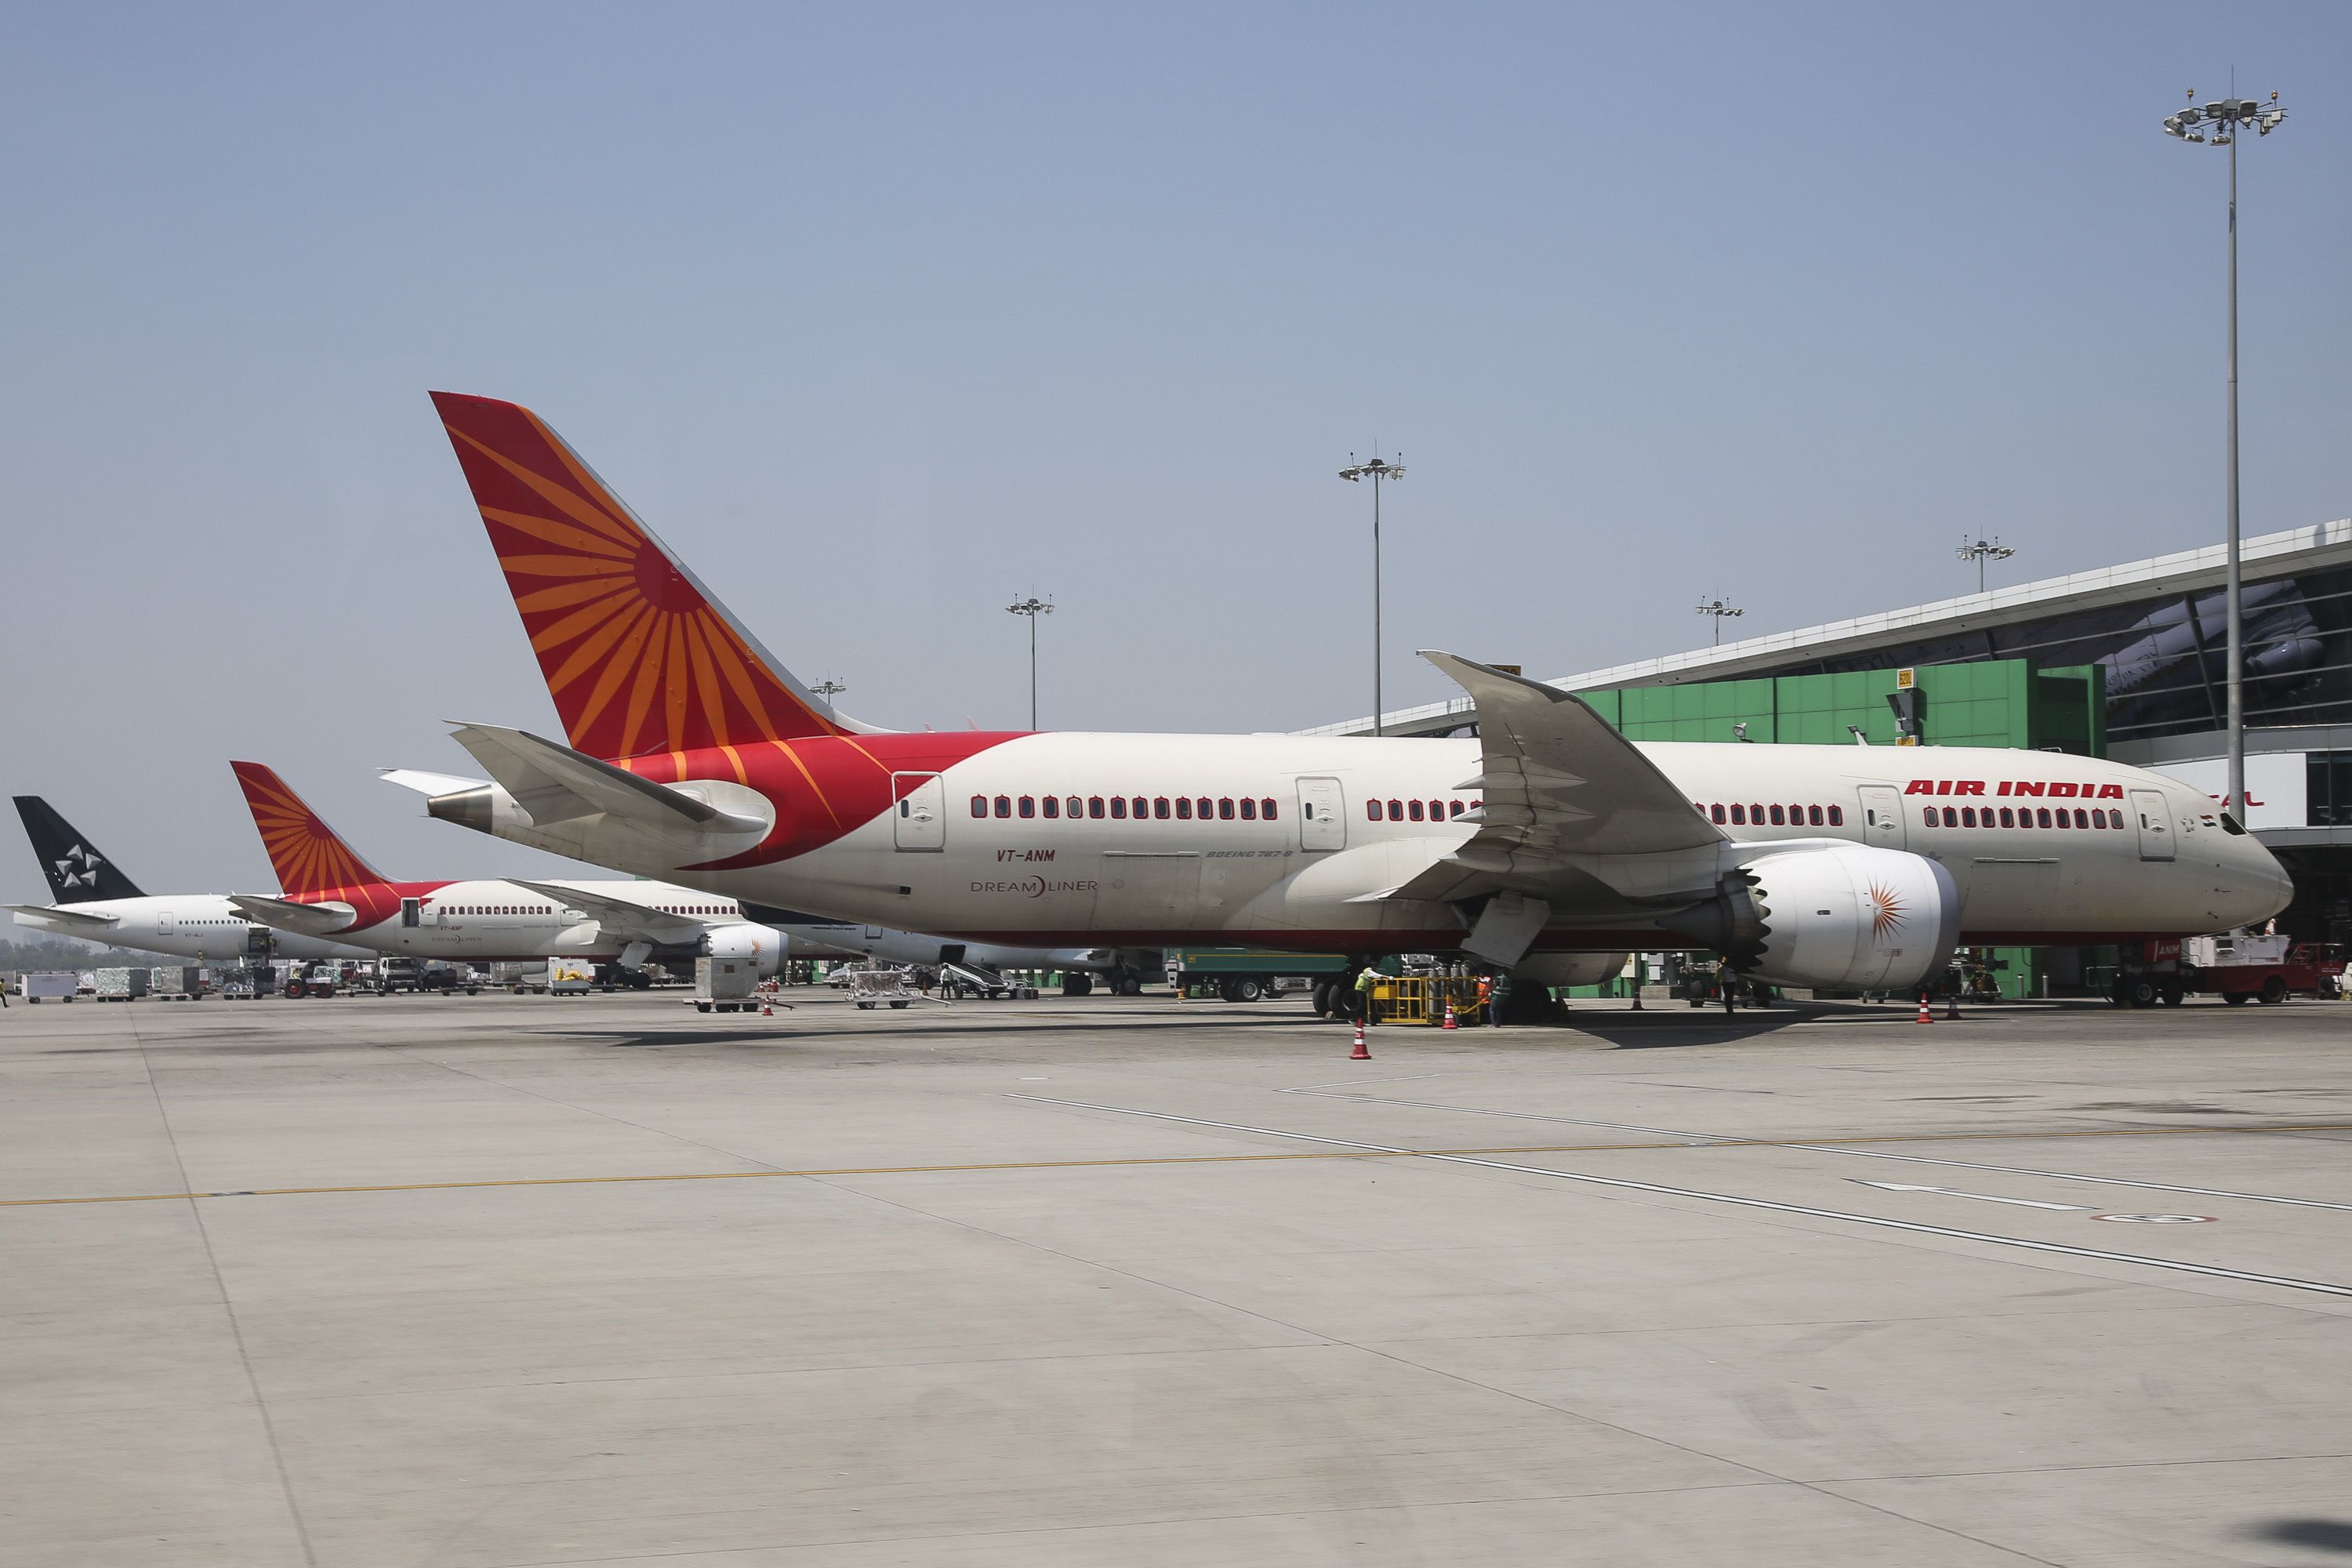 Several Air India aircraft parked on an airport apron.